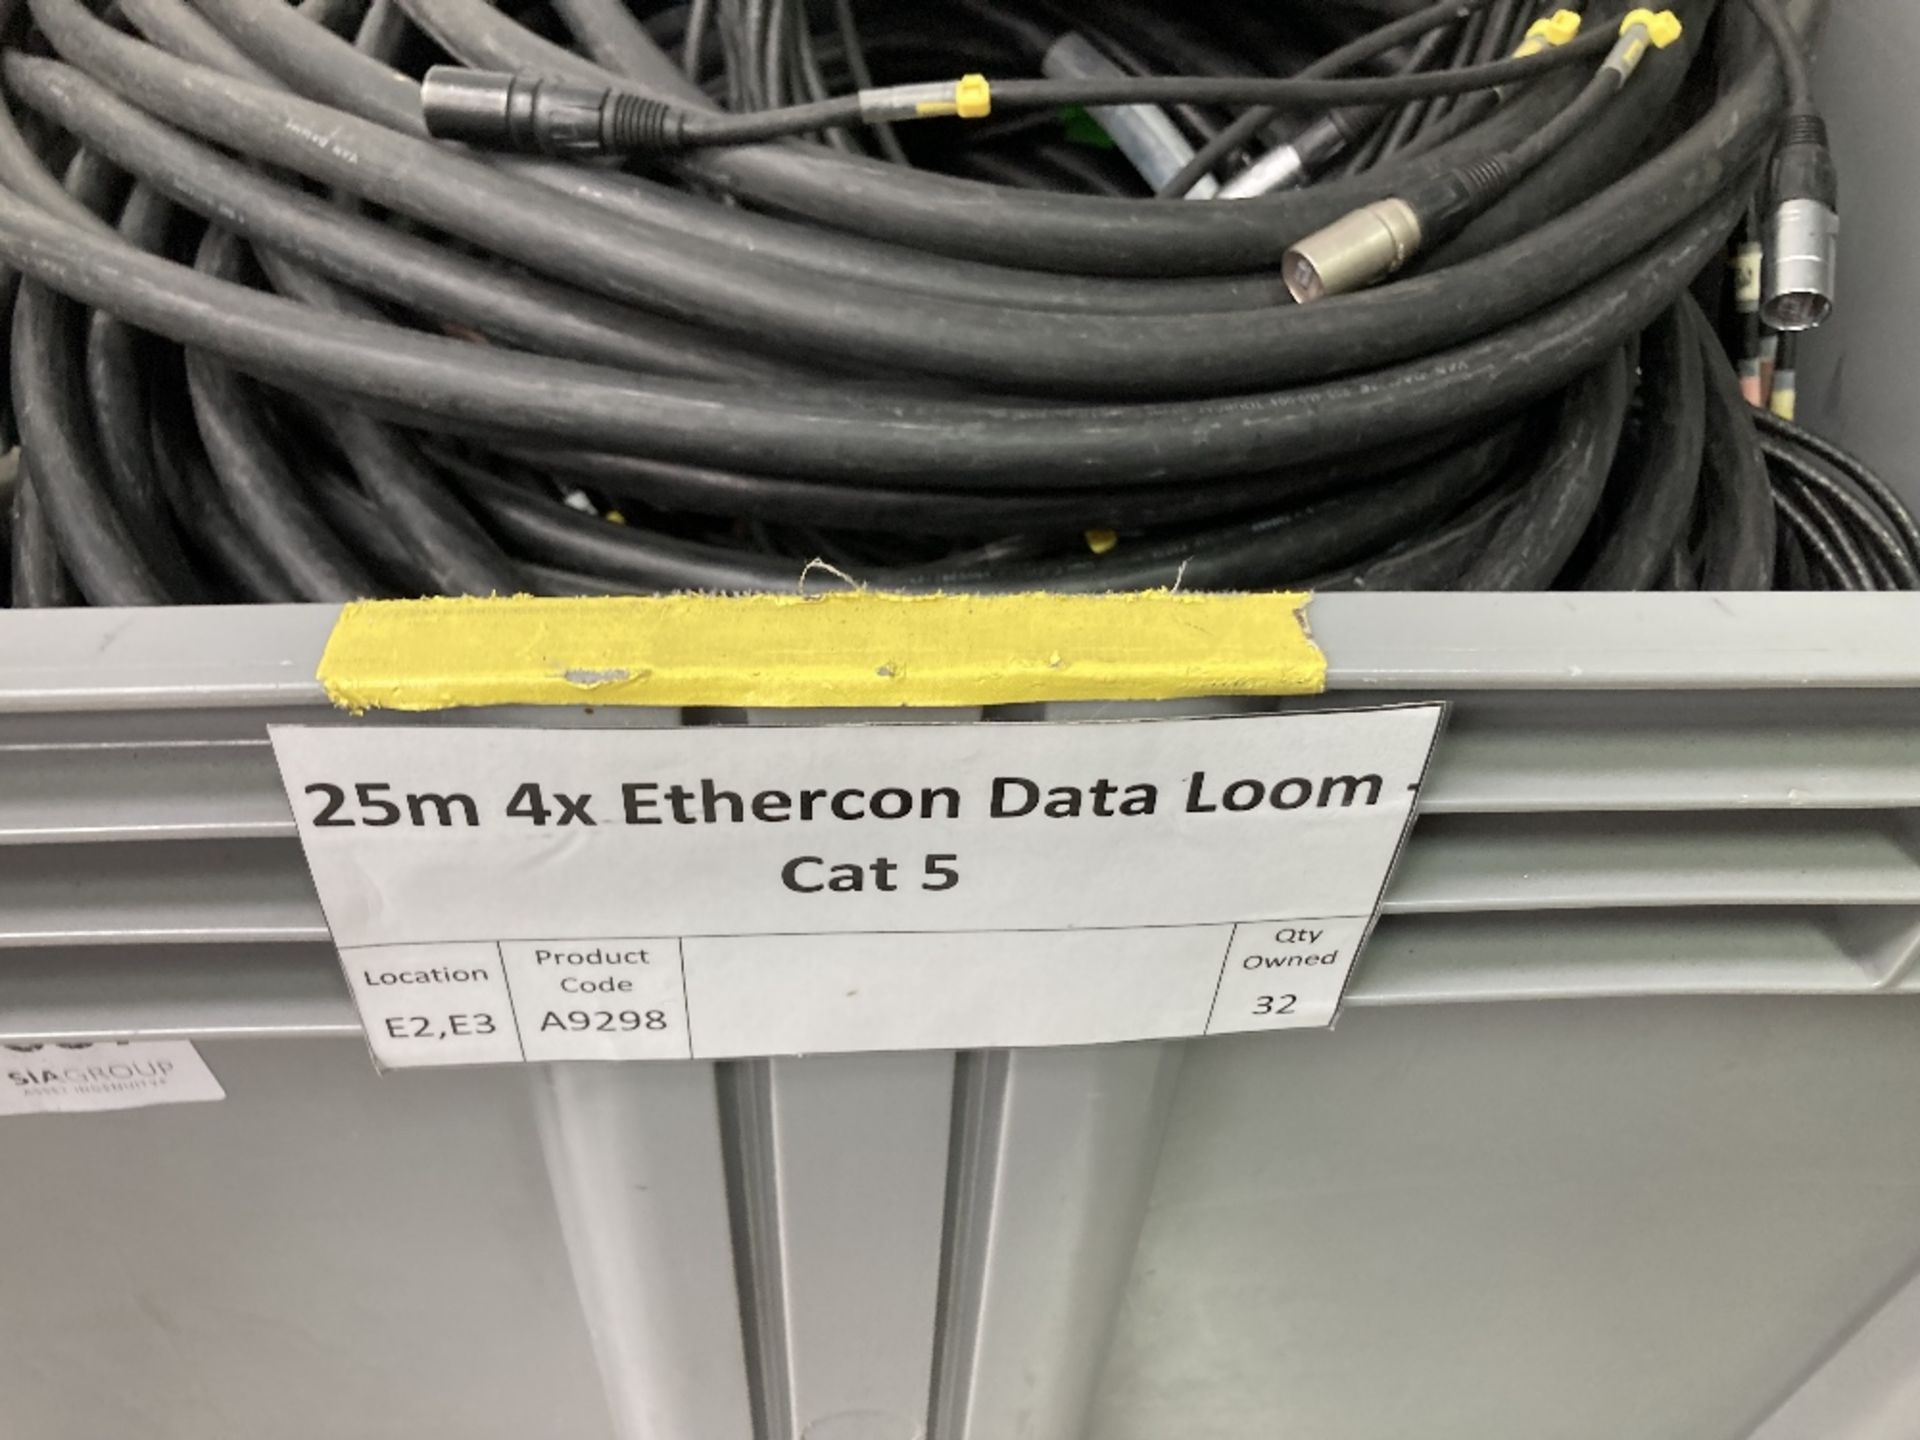 Quantity 25m Ethercon Data Loom CAT 5 Cables With Plastic Container - Image 4 of 4